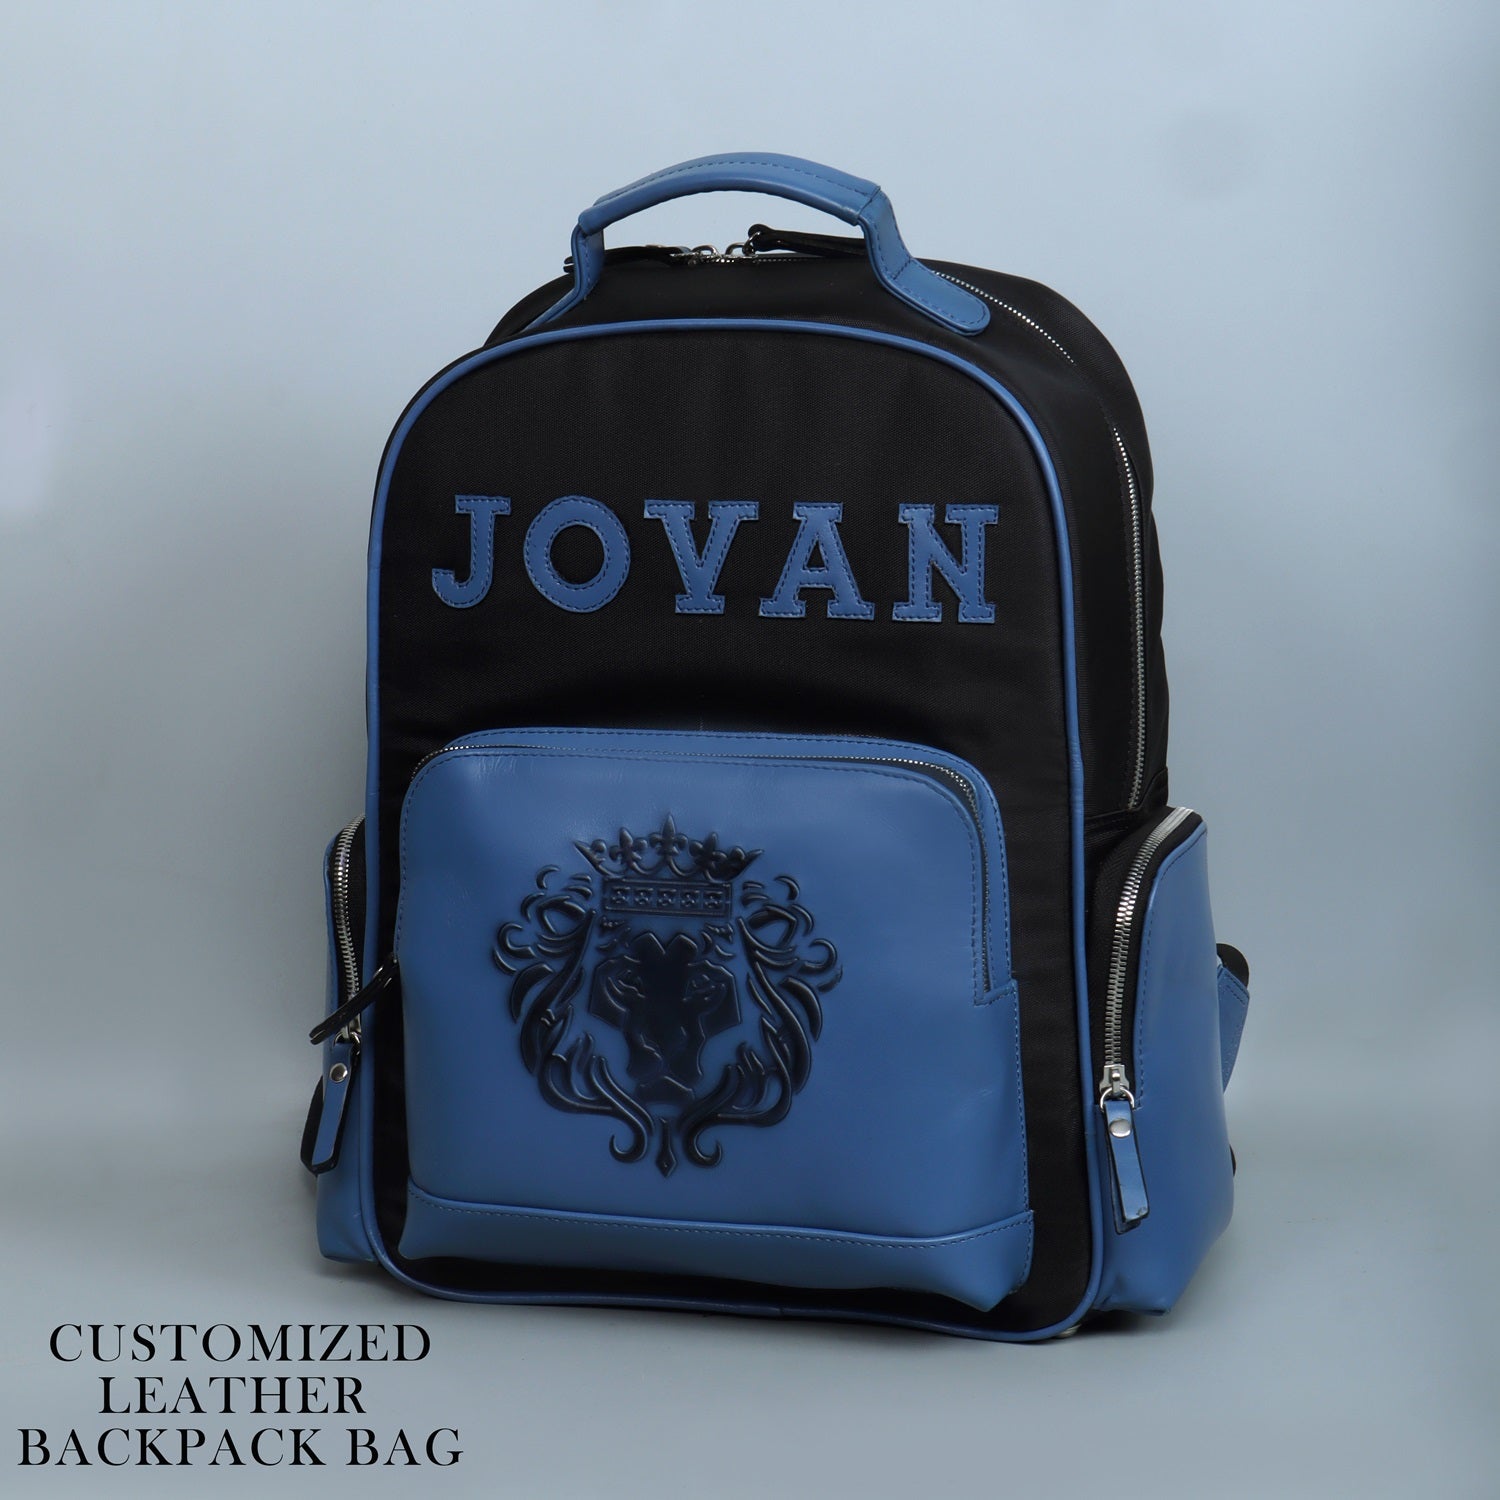 Customized "JOVAN" Initial Backpack